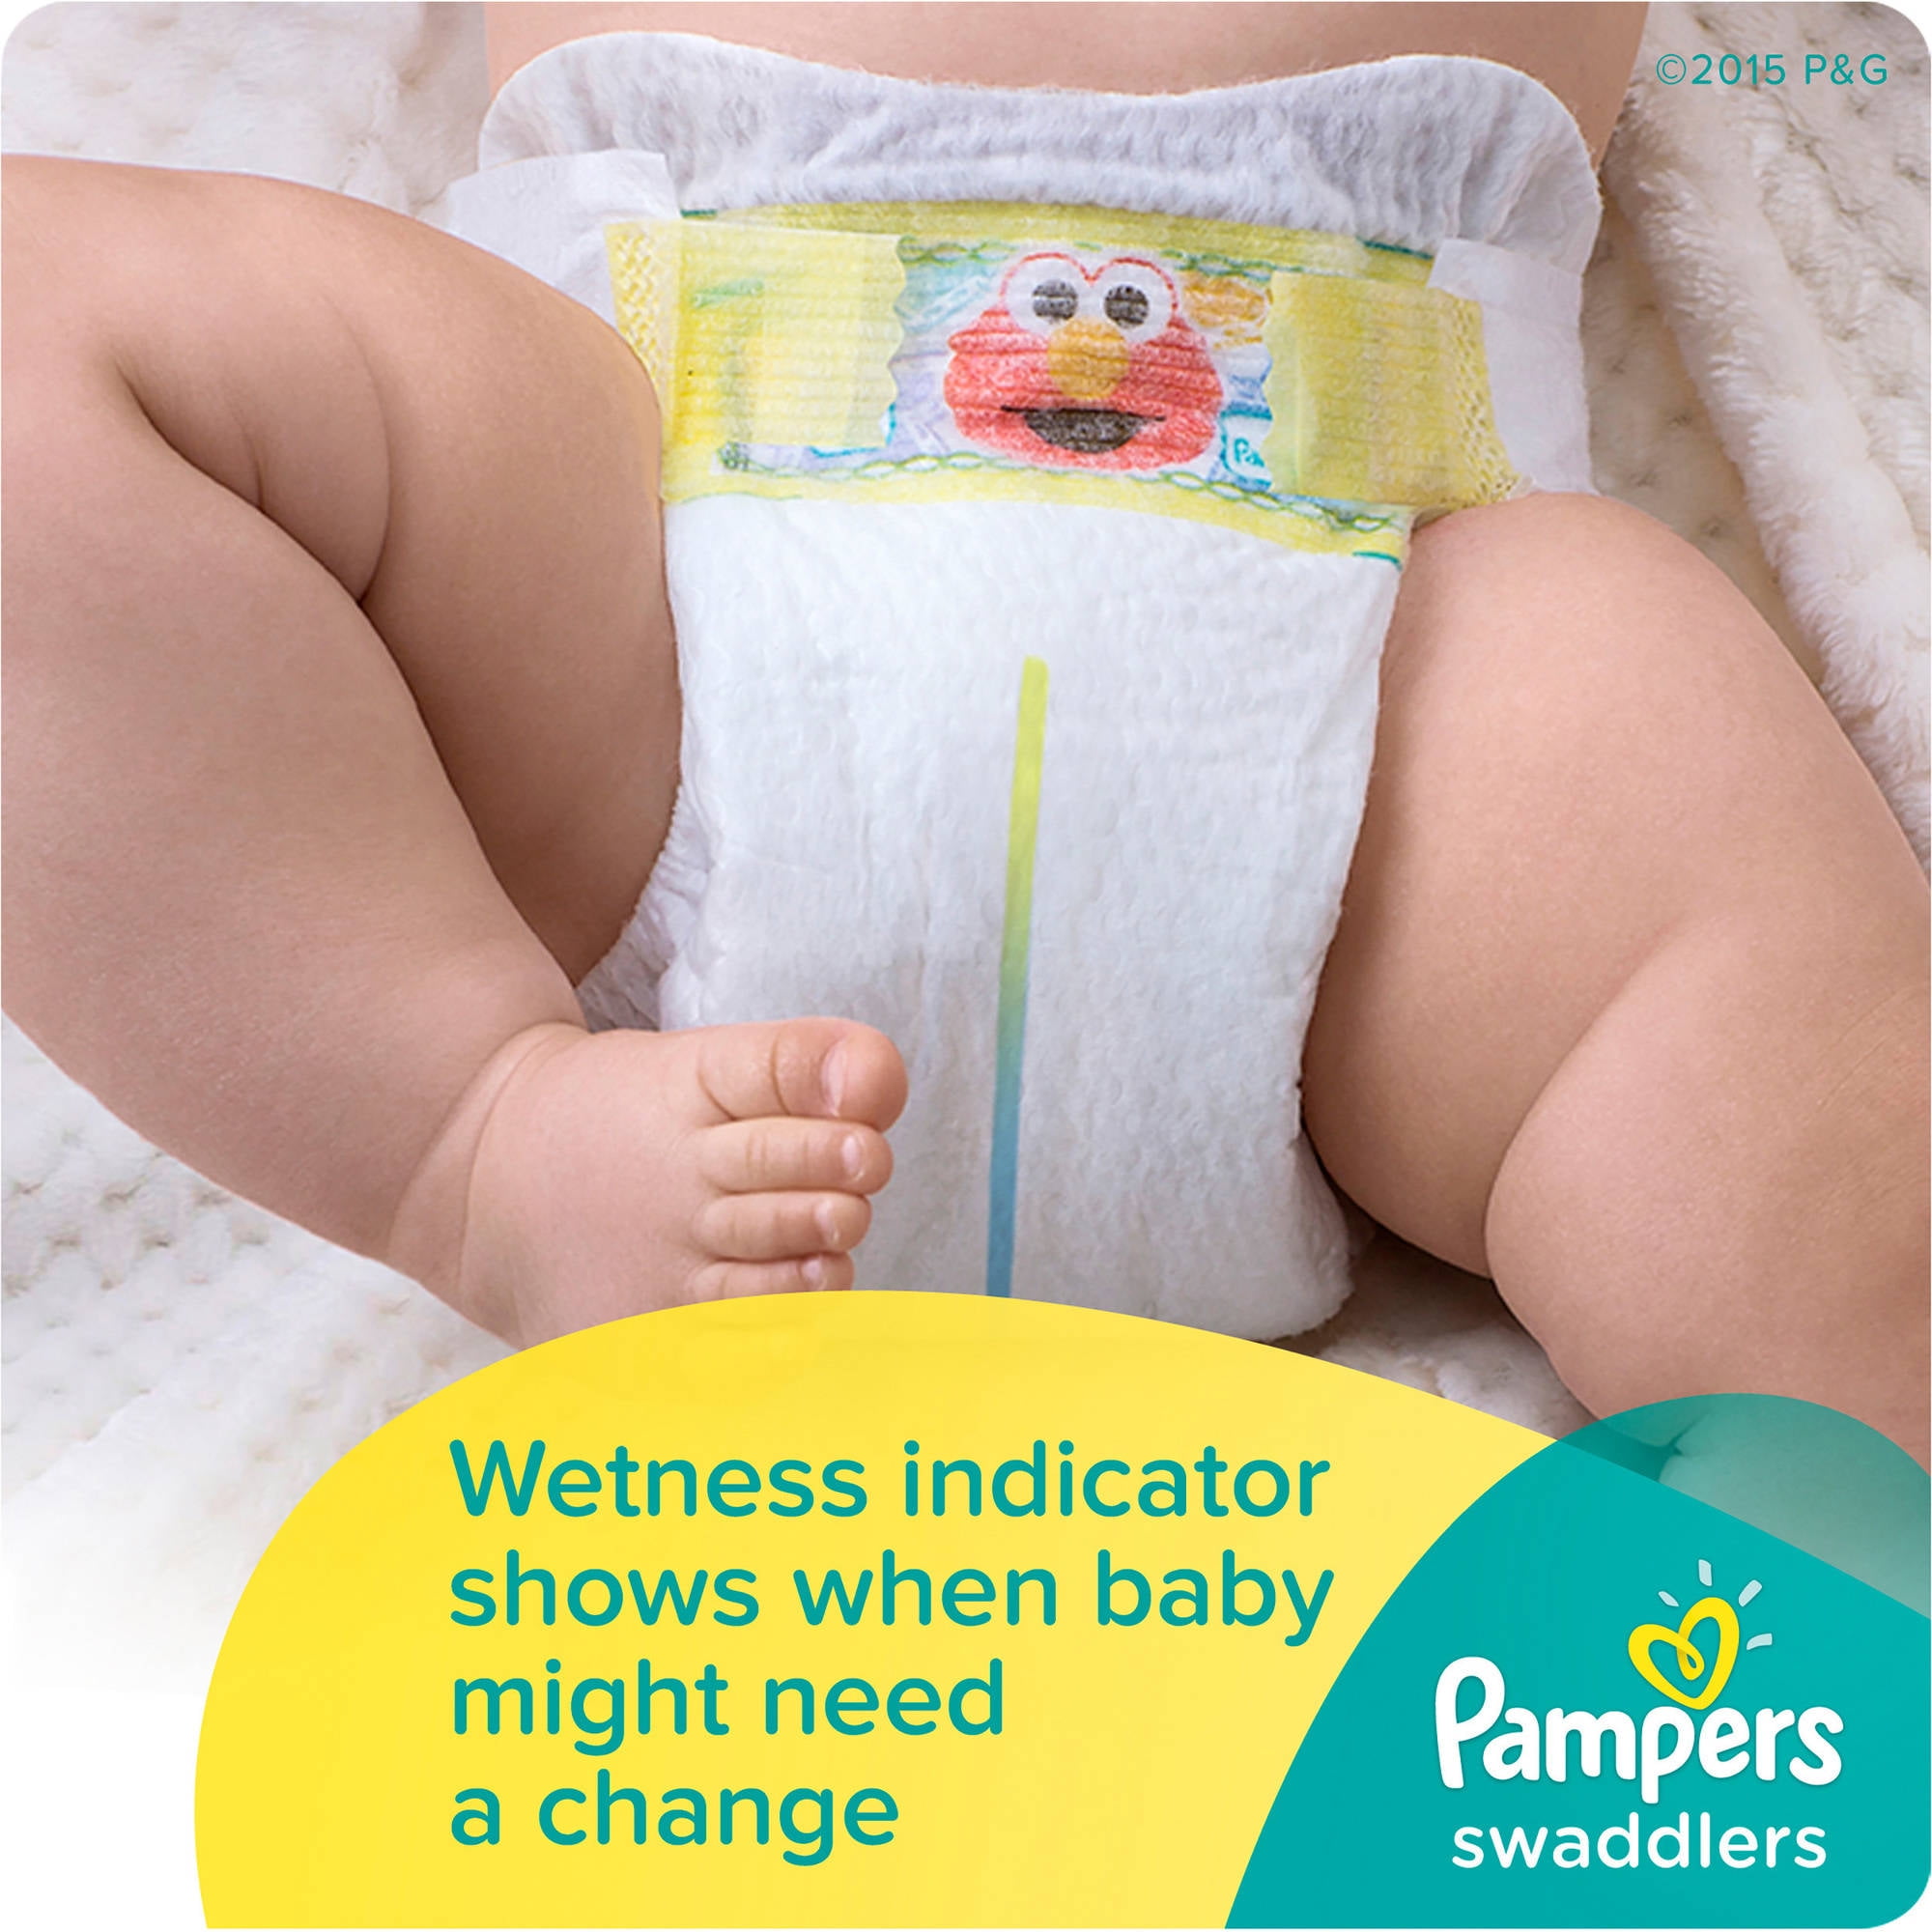 Pampers Swaddlers Diapers One Month Supply, (Choose Your Size ...